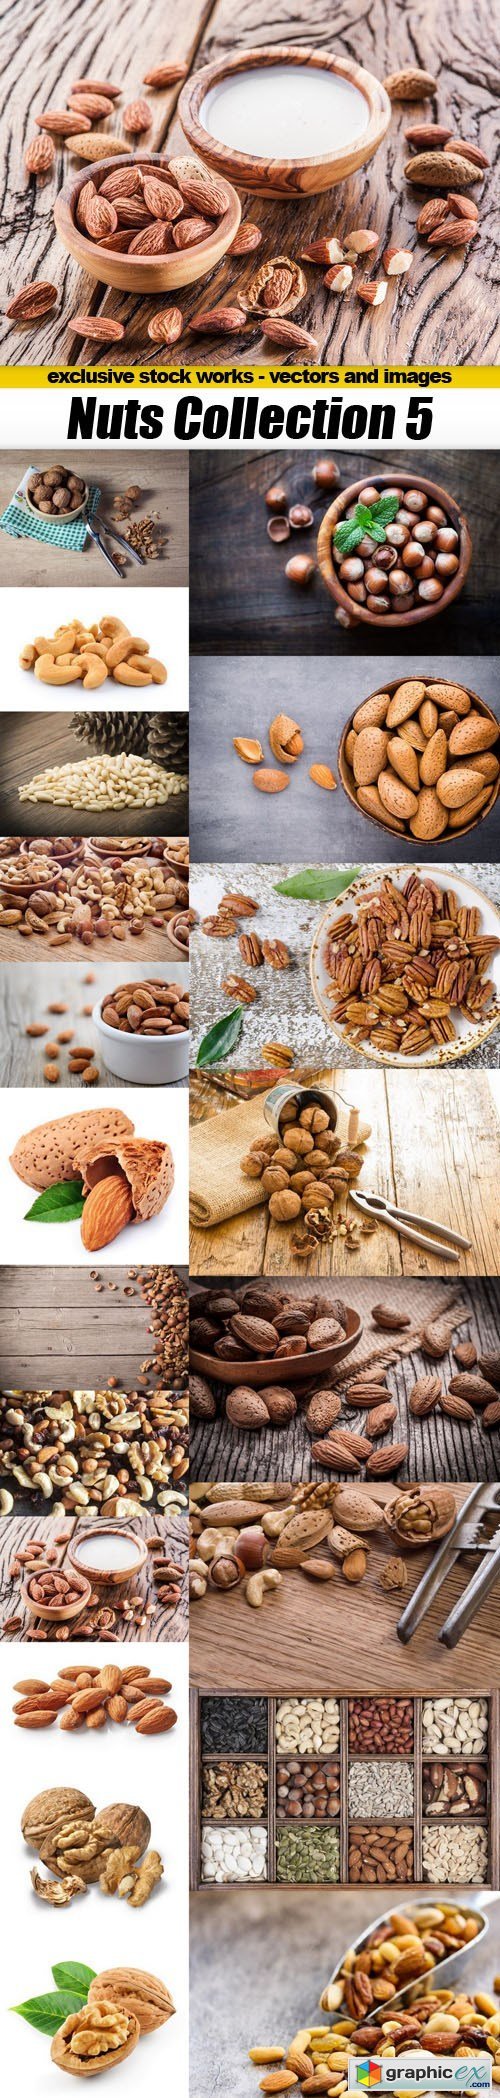 Nuts Collection 5 - 20xUHQ JPEG